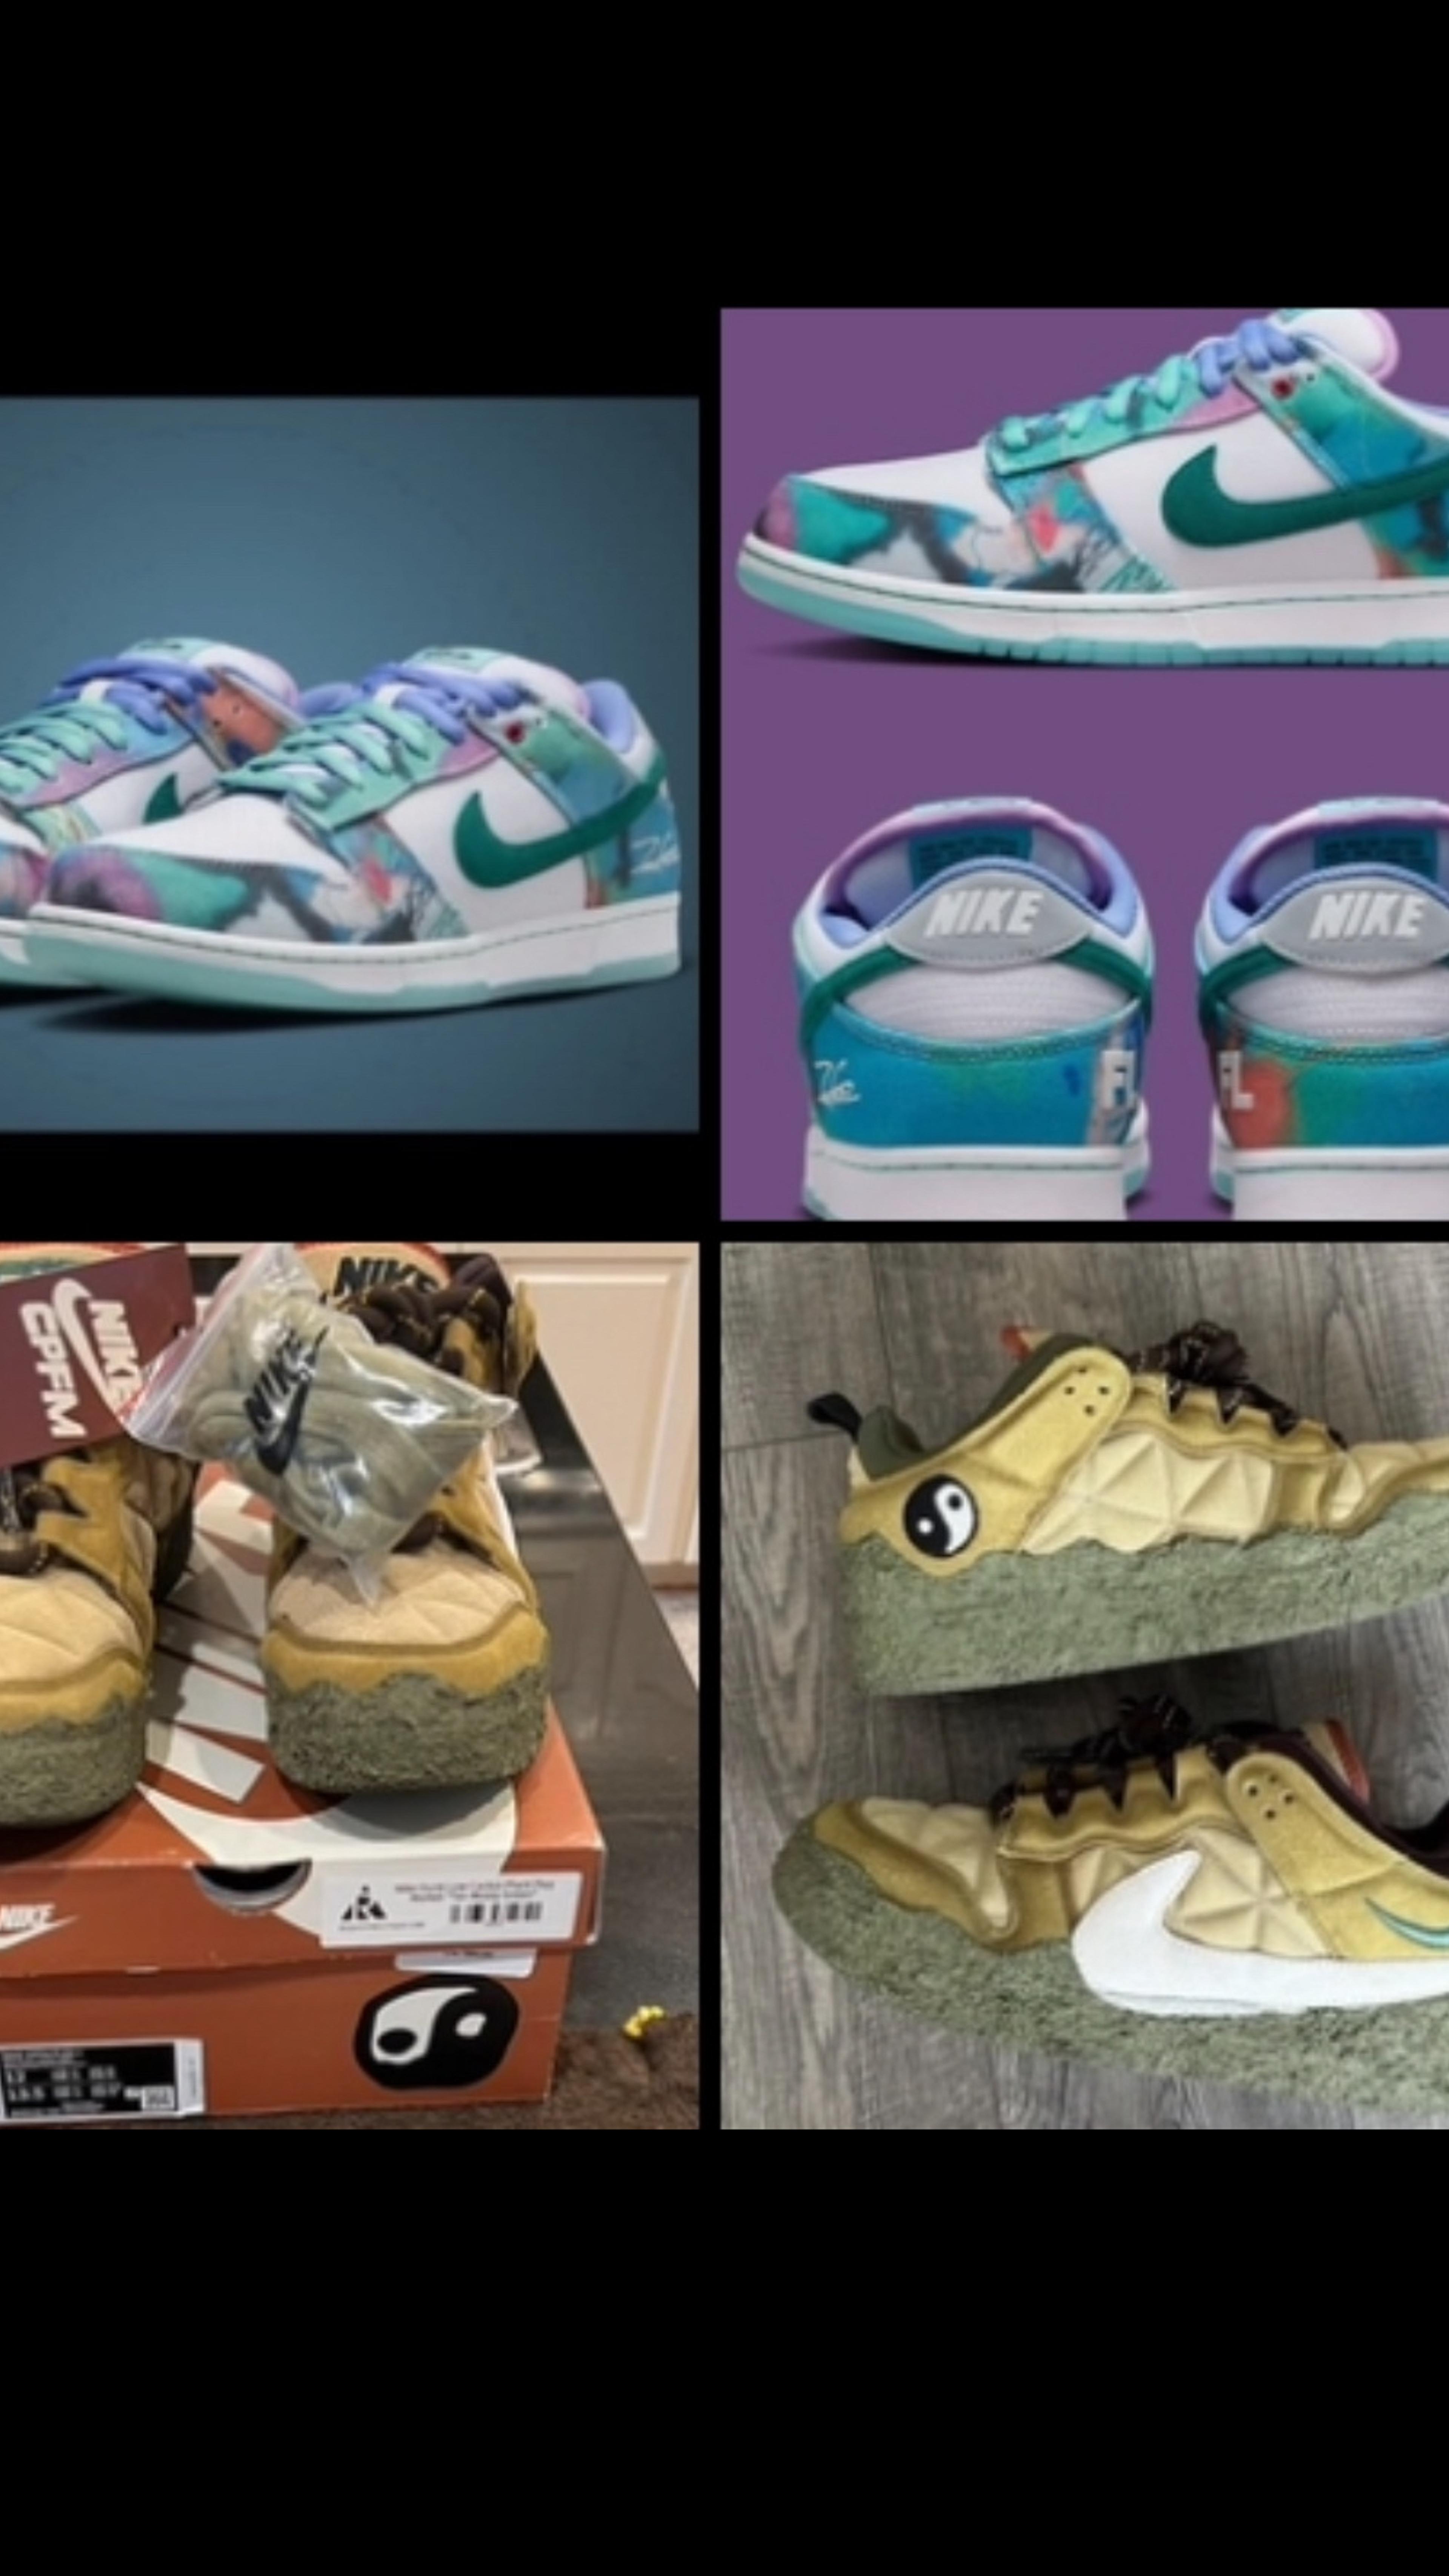 Preview image for the show titled "DS OG ALL CACTUS FLEA MARKET DESSERT MOSS & SB FUTURA&INSTA HITS" at May 18, 2024